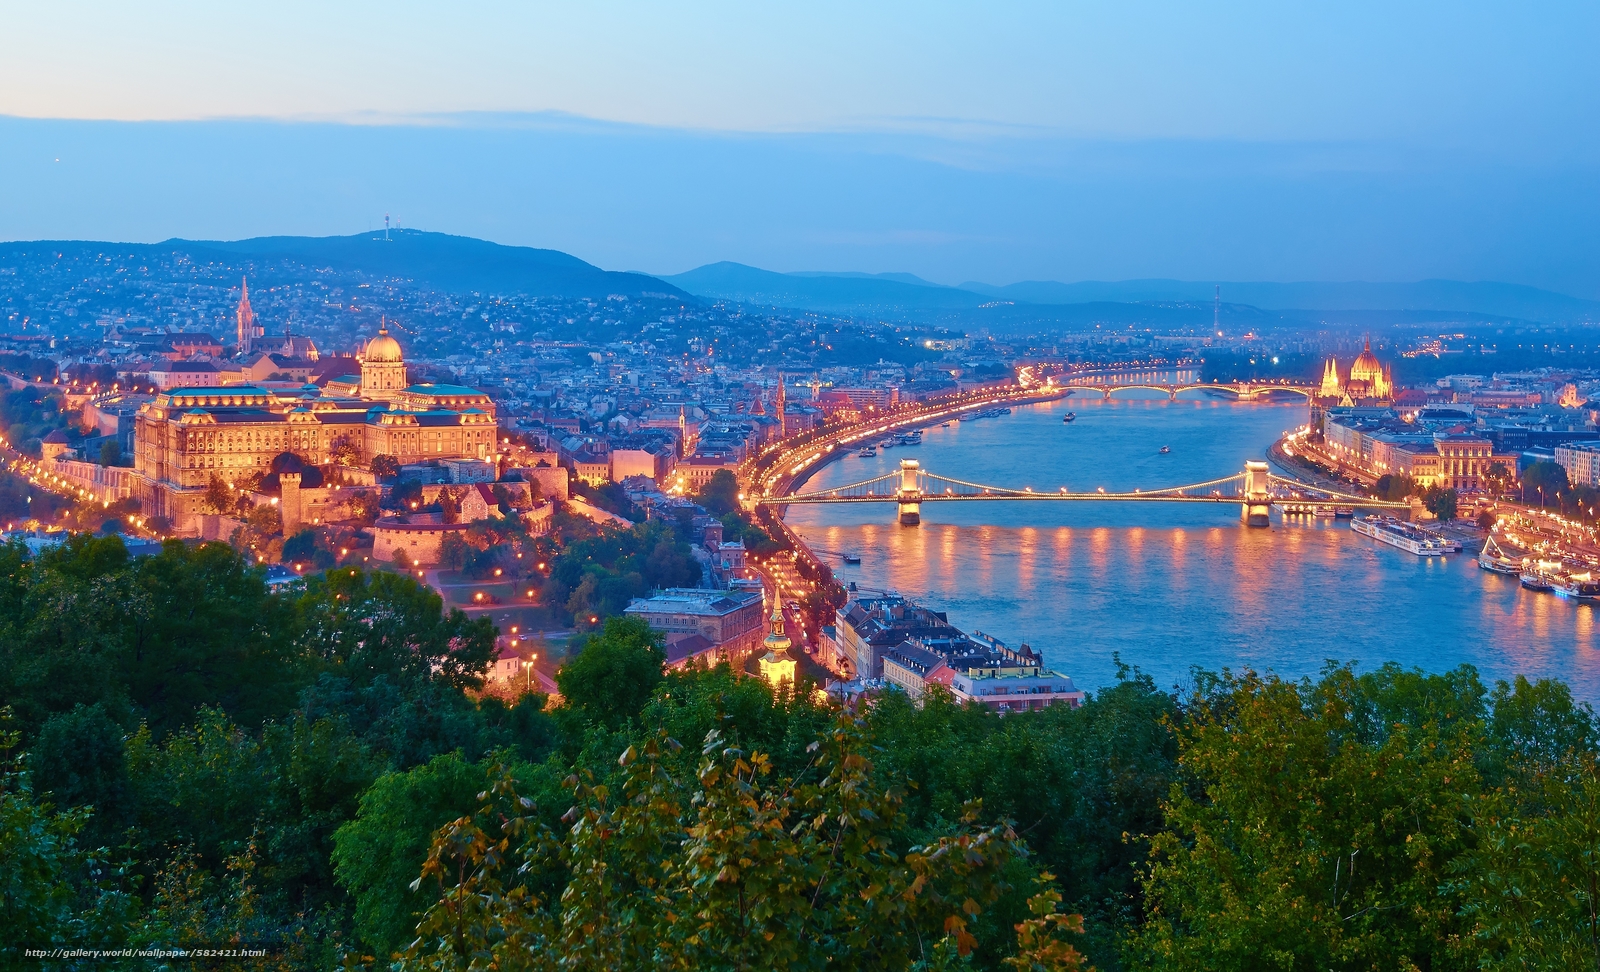 Download wallpaper The Danube River, Budapest, sunset free desktop wallpaper in the resolution 3840x2333